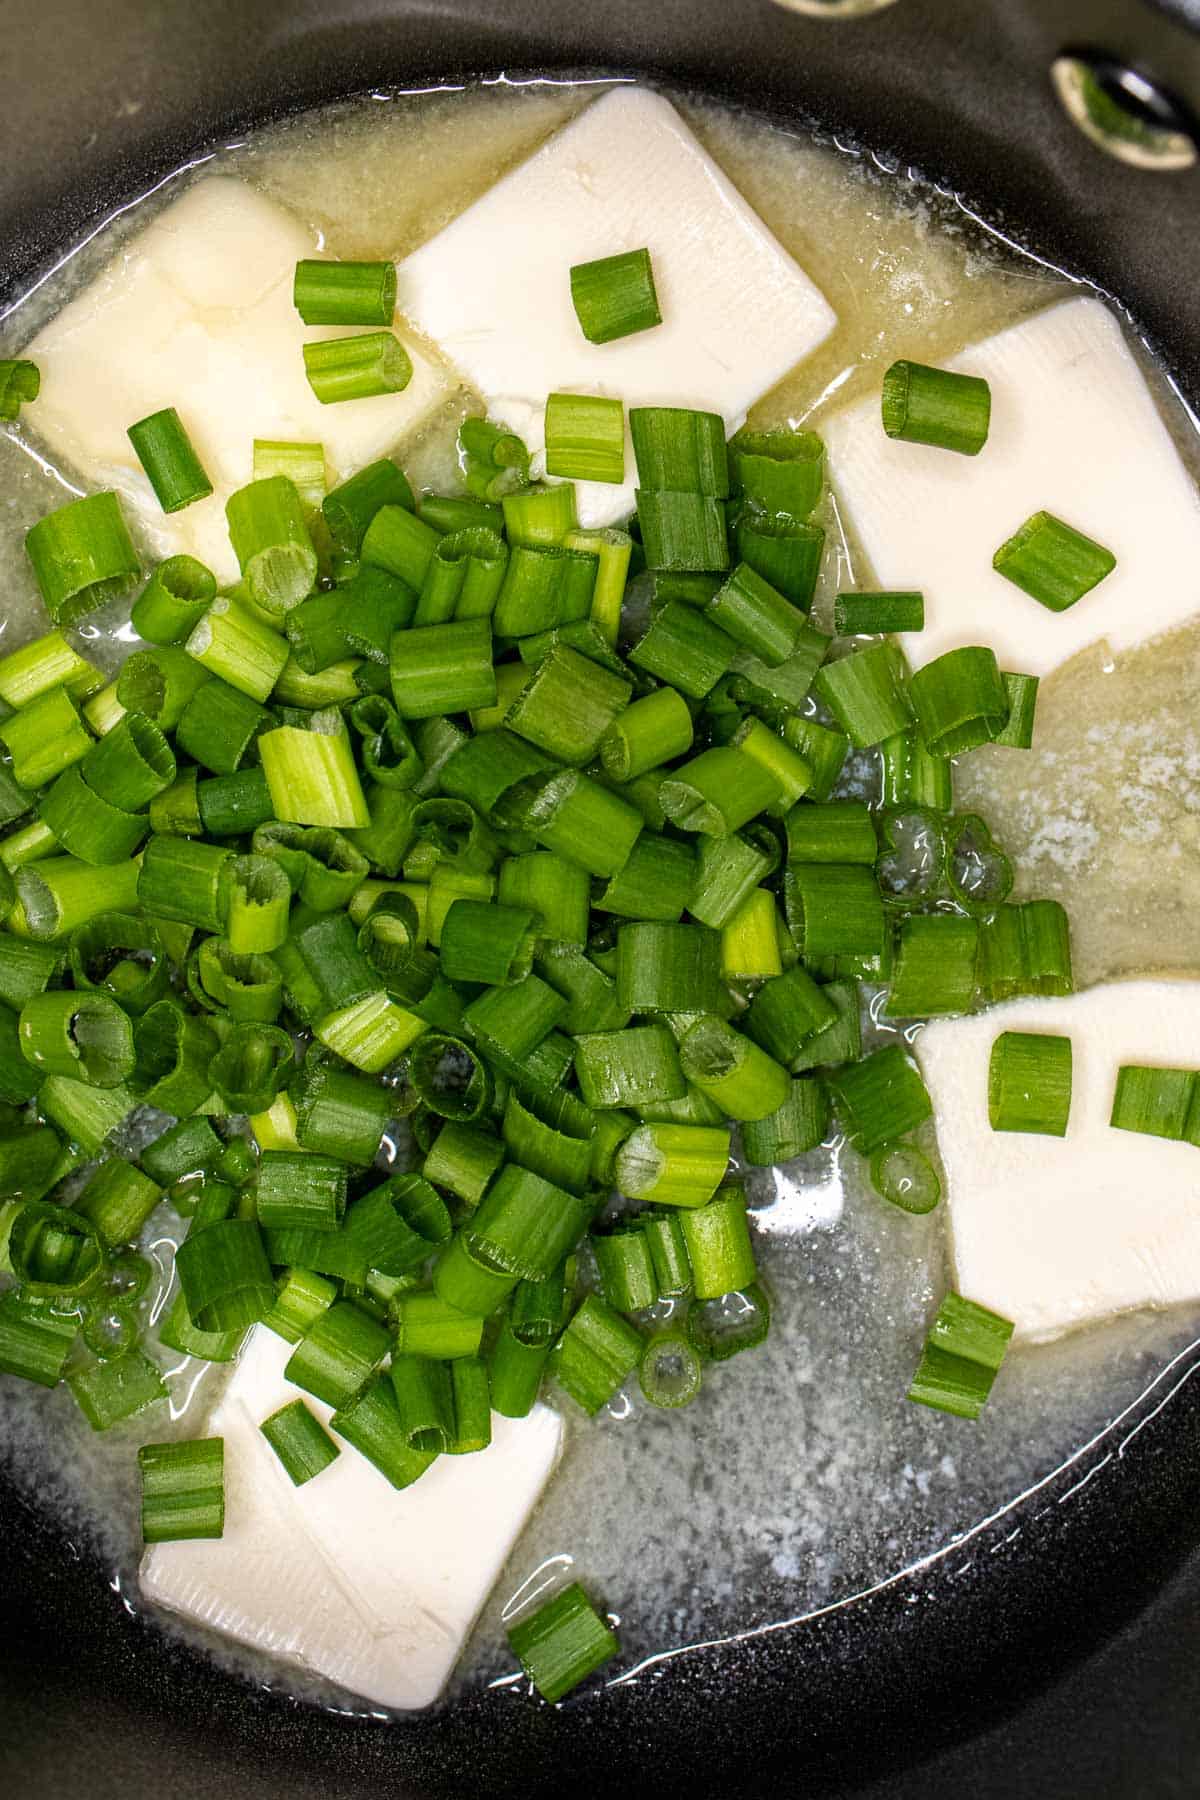 Butter melting in a skillet with chopped spring onions.